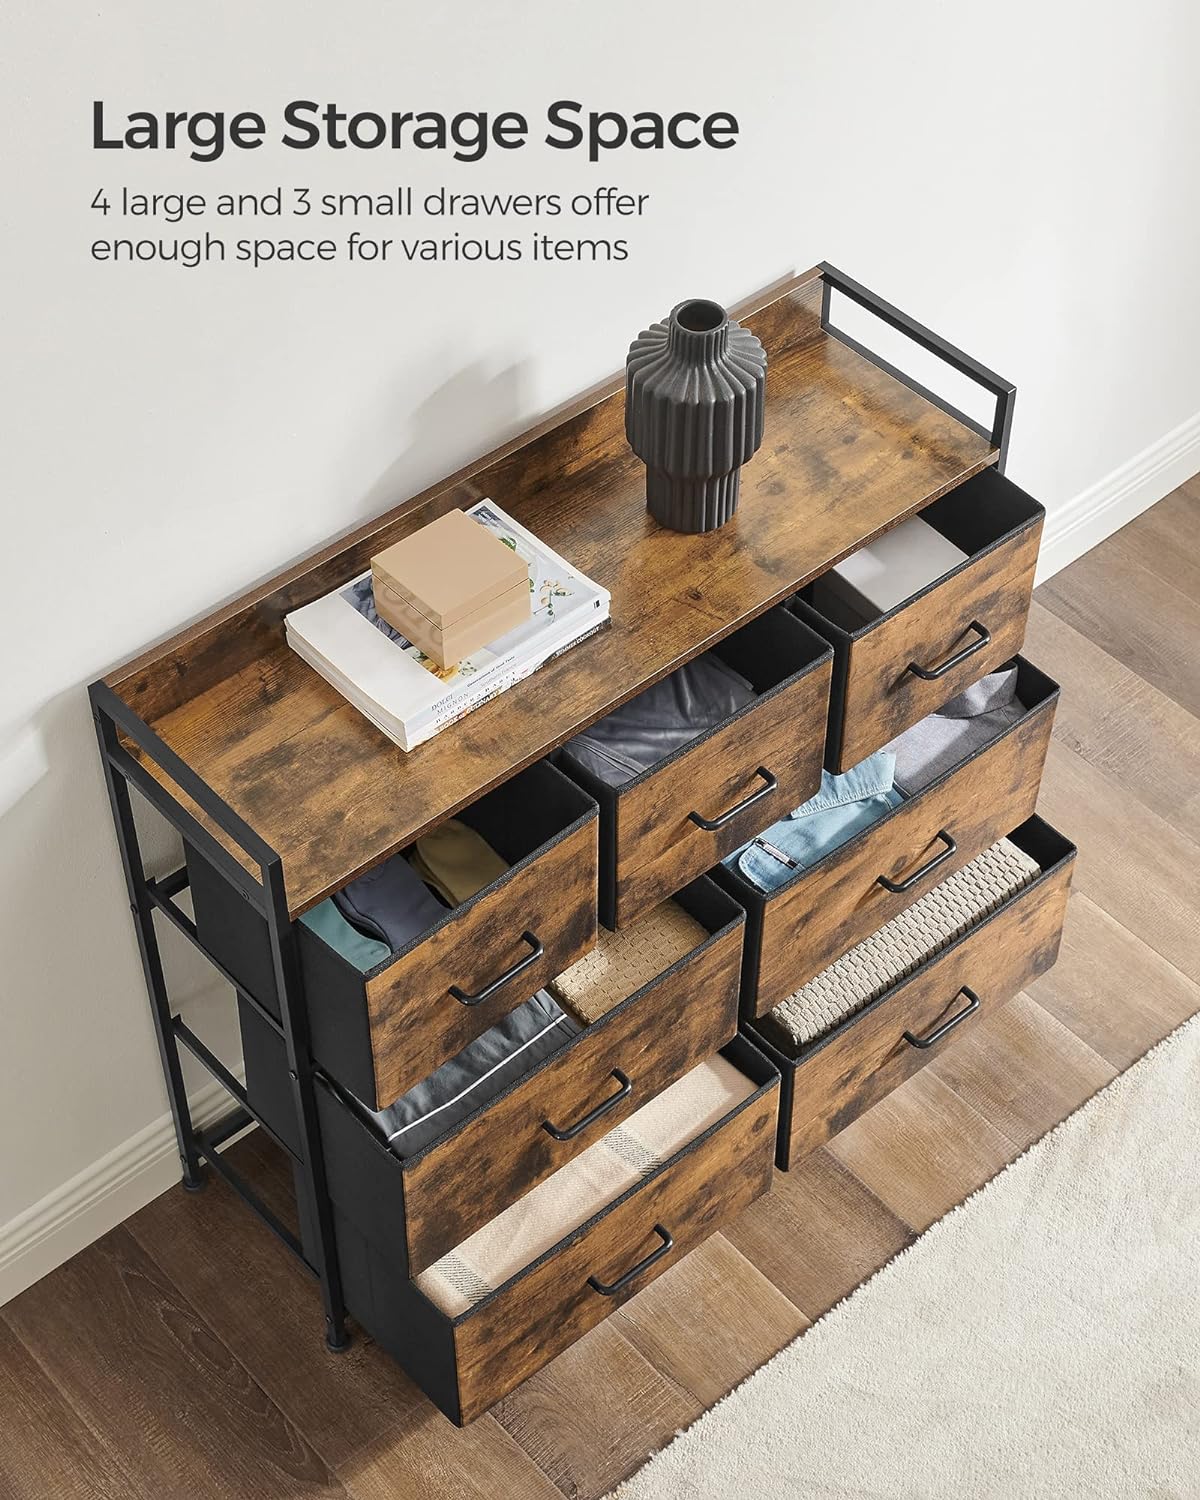 SONGMICS Dresser for Bedroom Chest of Drawers Rustic Brown and Black